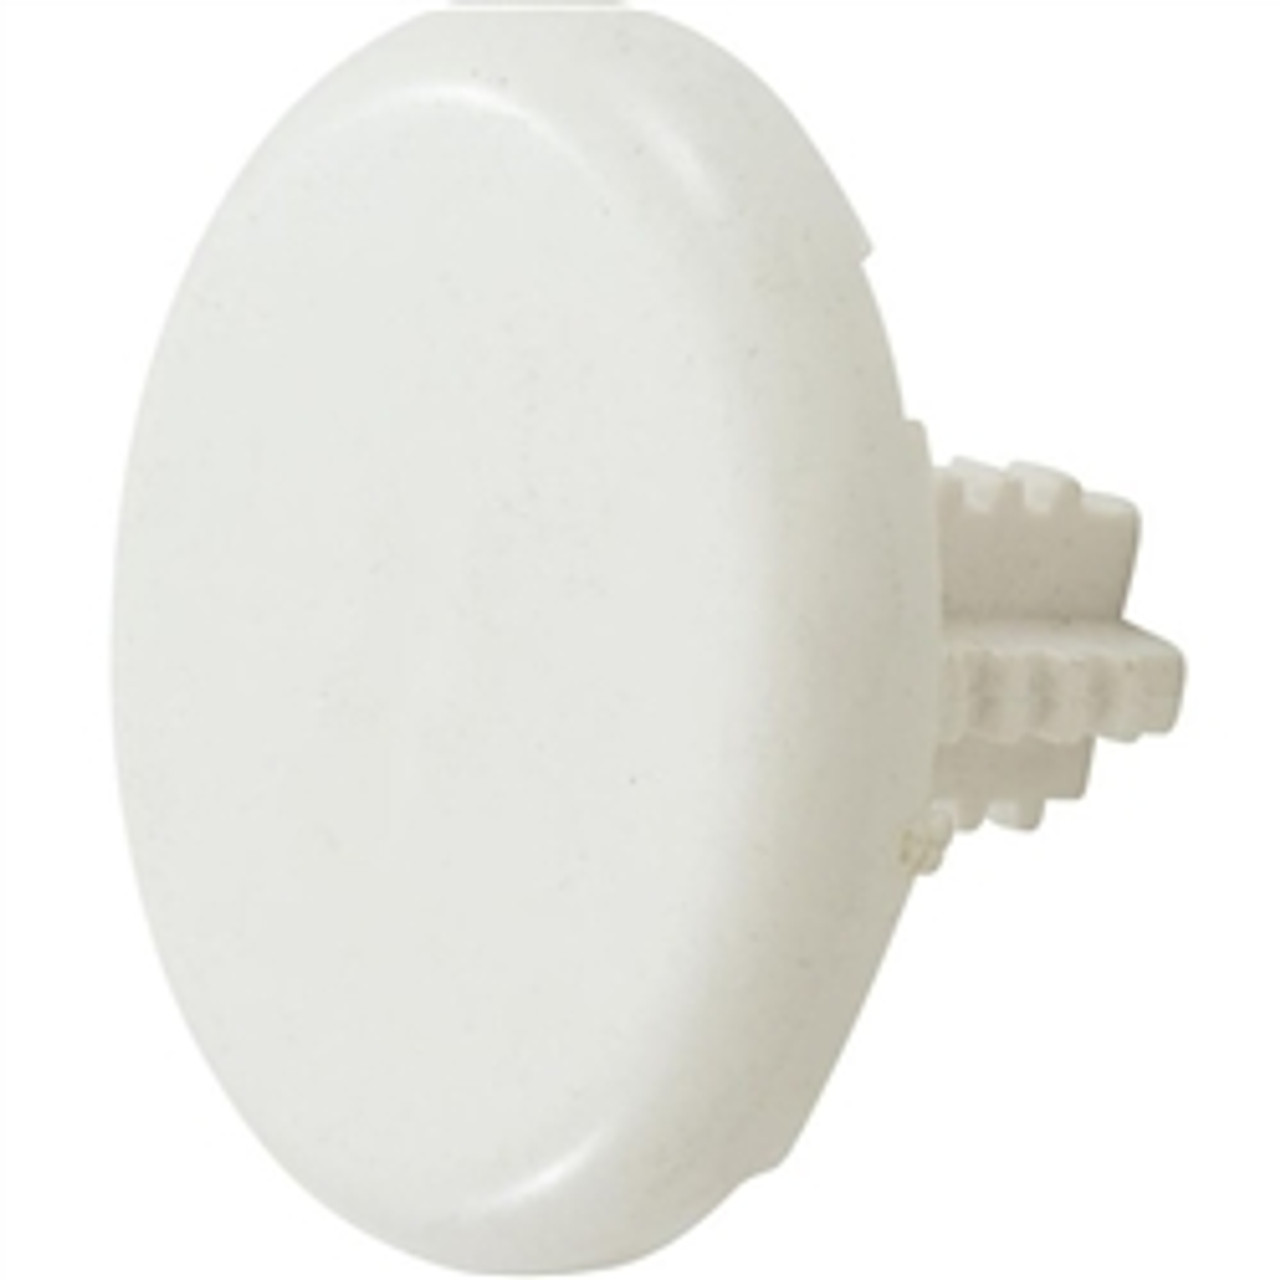 Waterway Low Pro Air Injector Cap Only, White - 672-2130